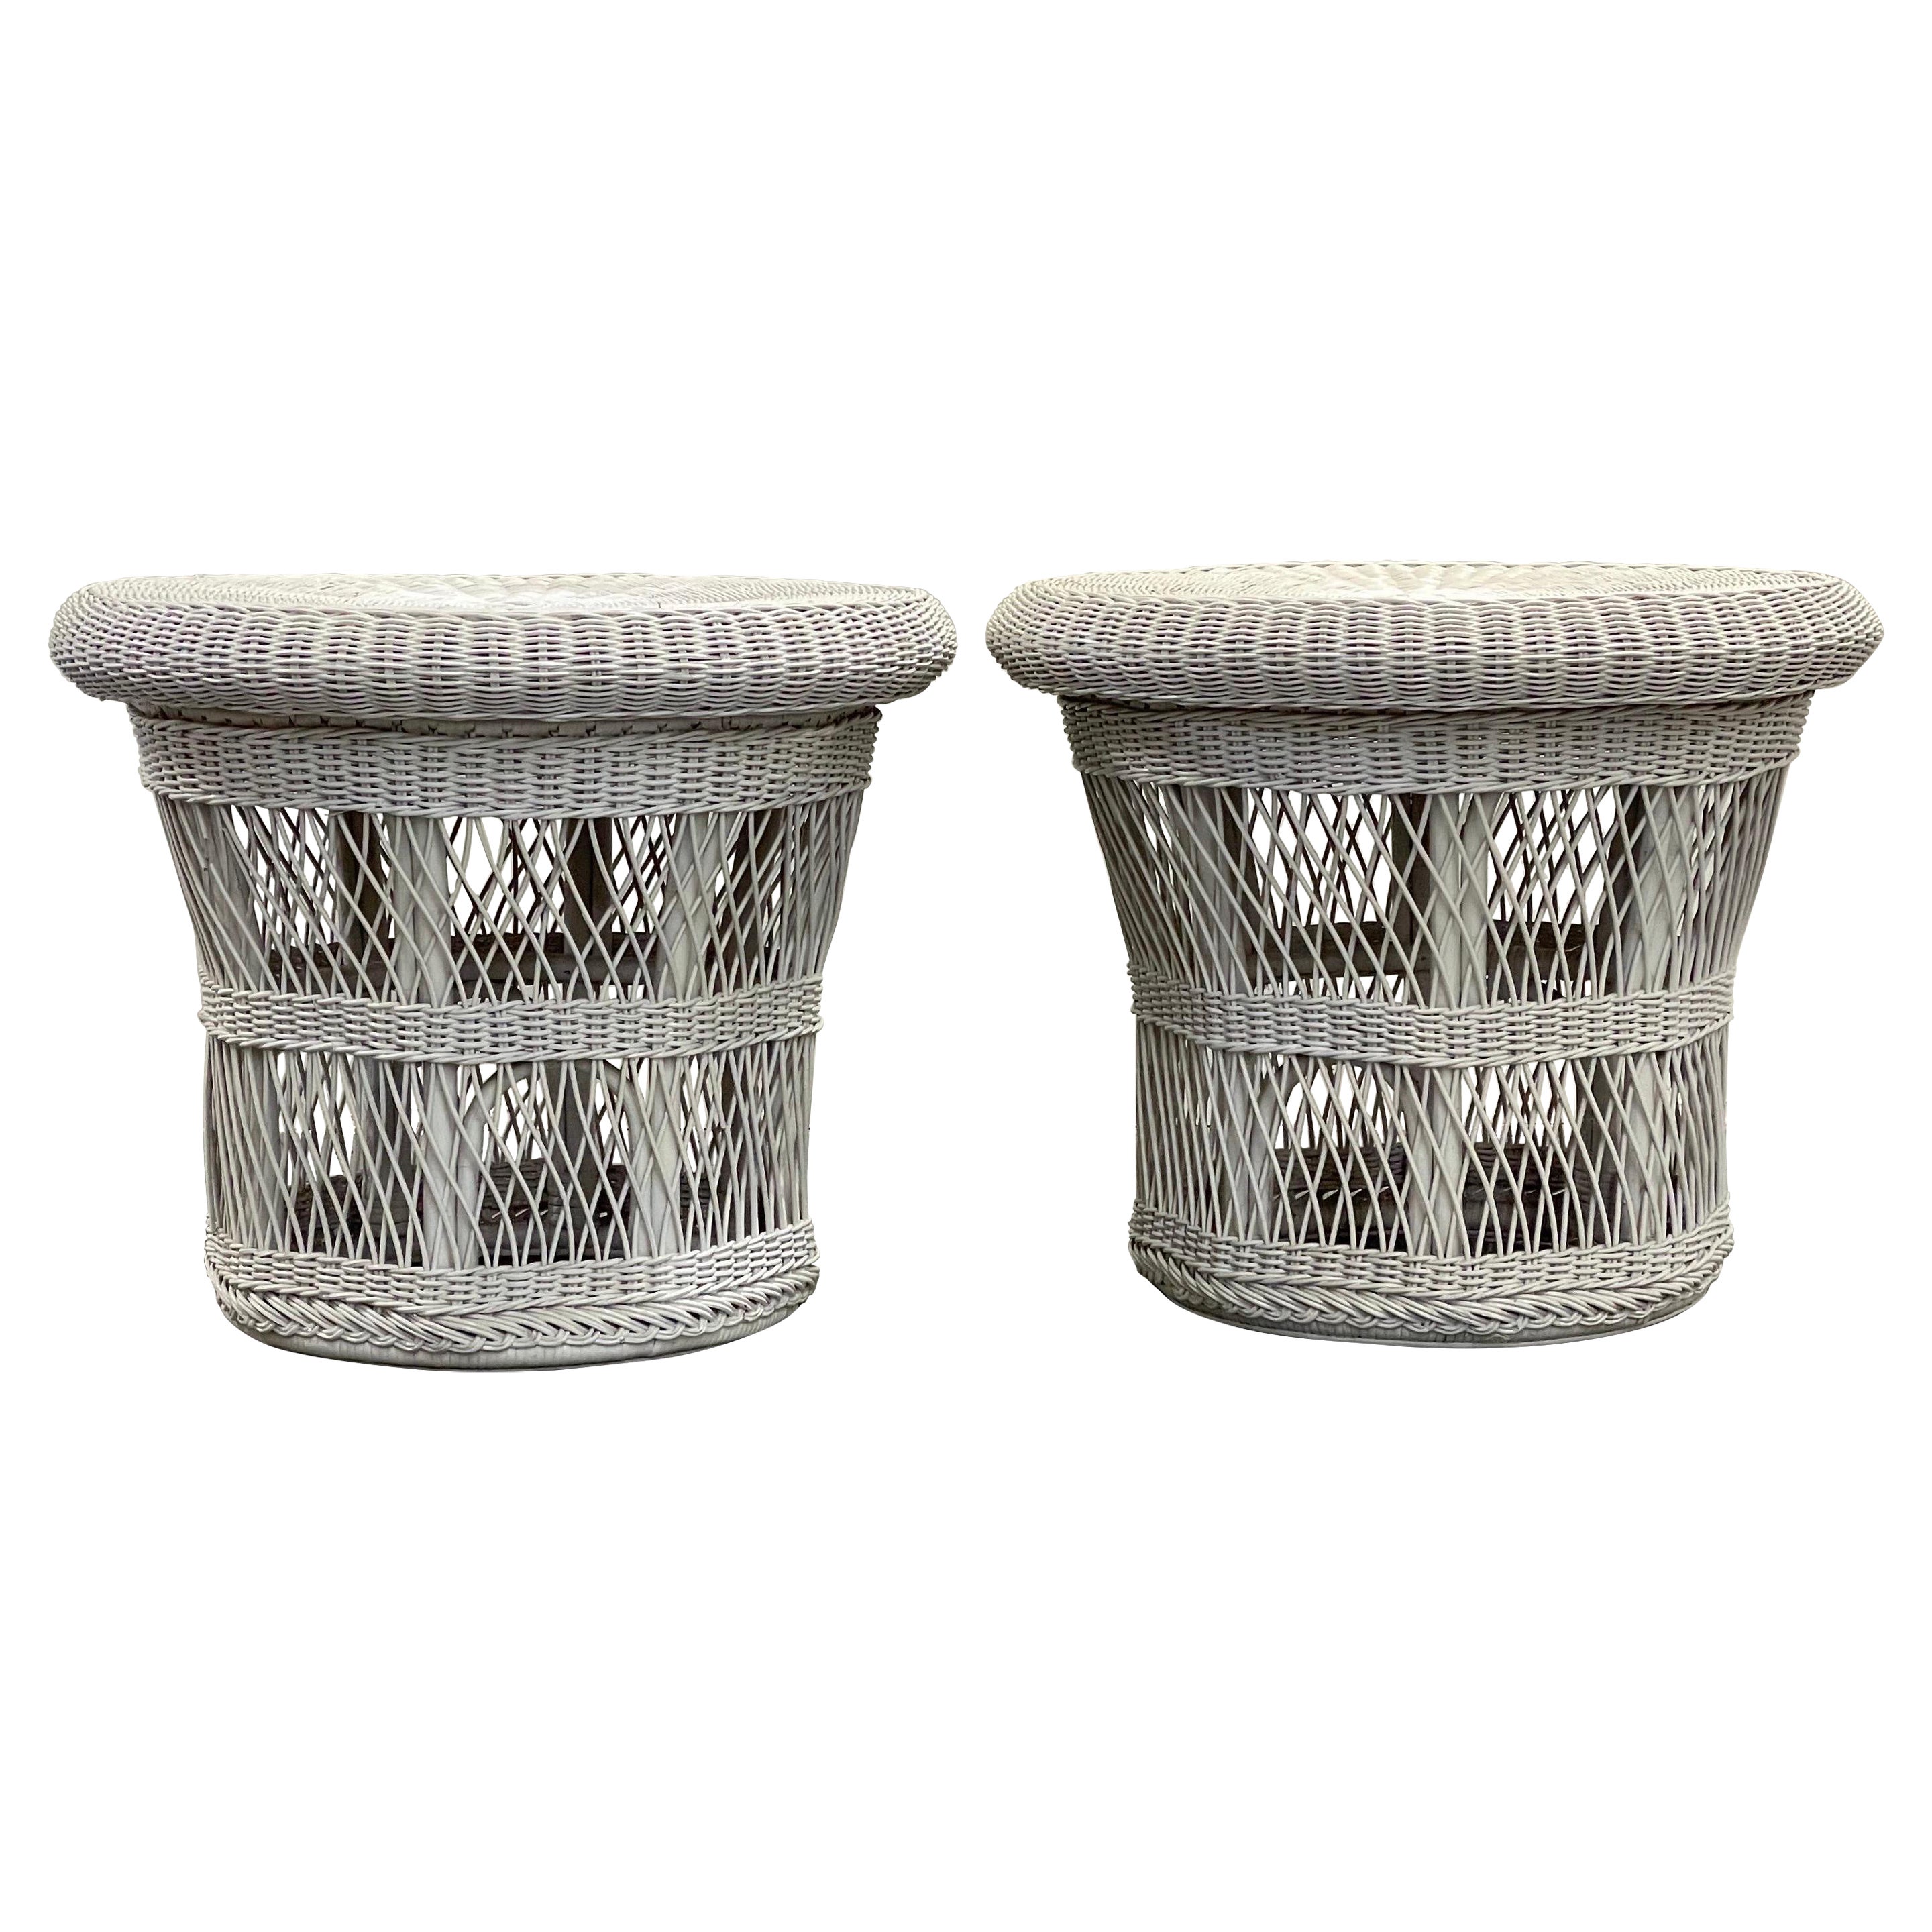 Vintage Wicker Side Tables with Tray Tops, a Pair For Sale